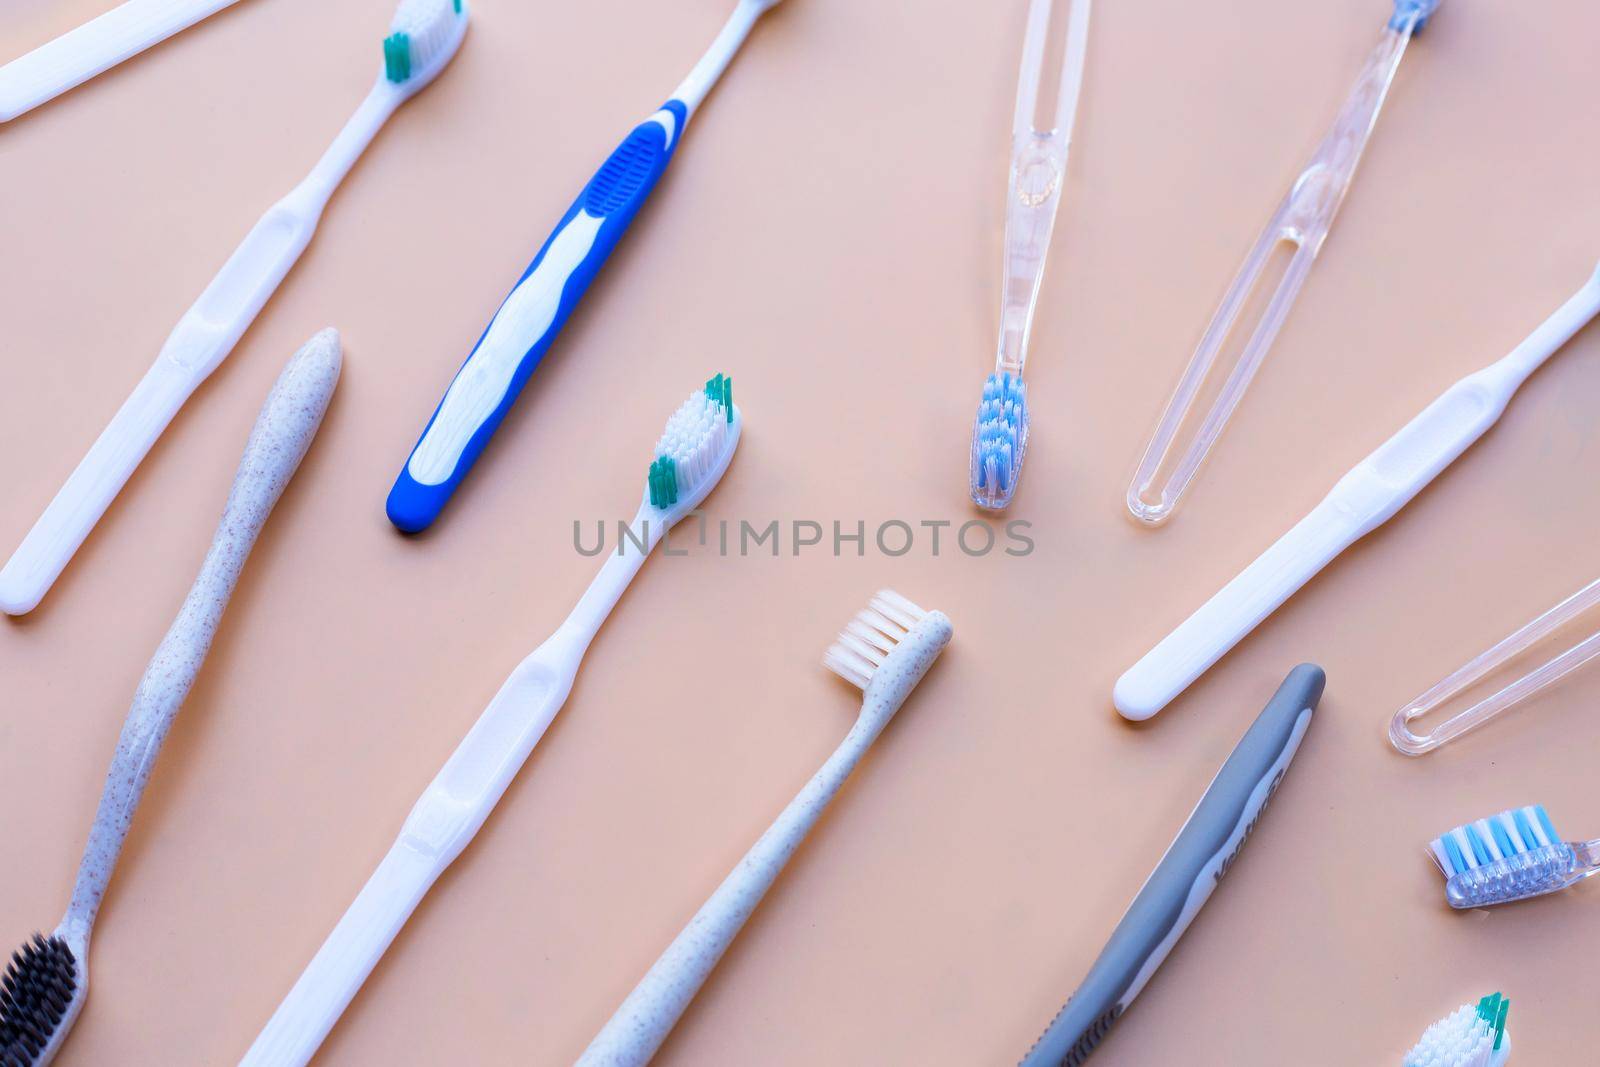 Top view of toothbrushes. Dental care concept